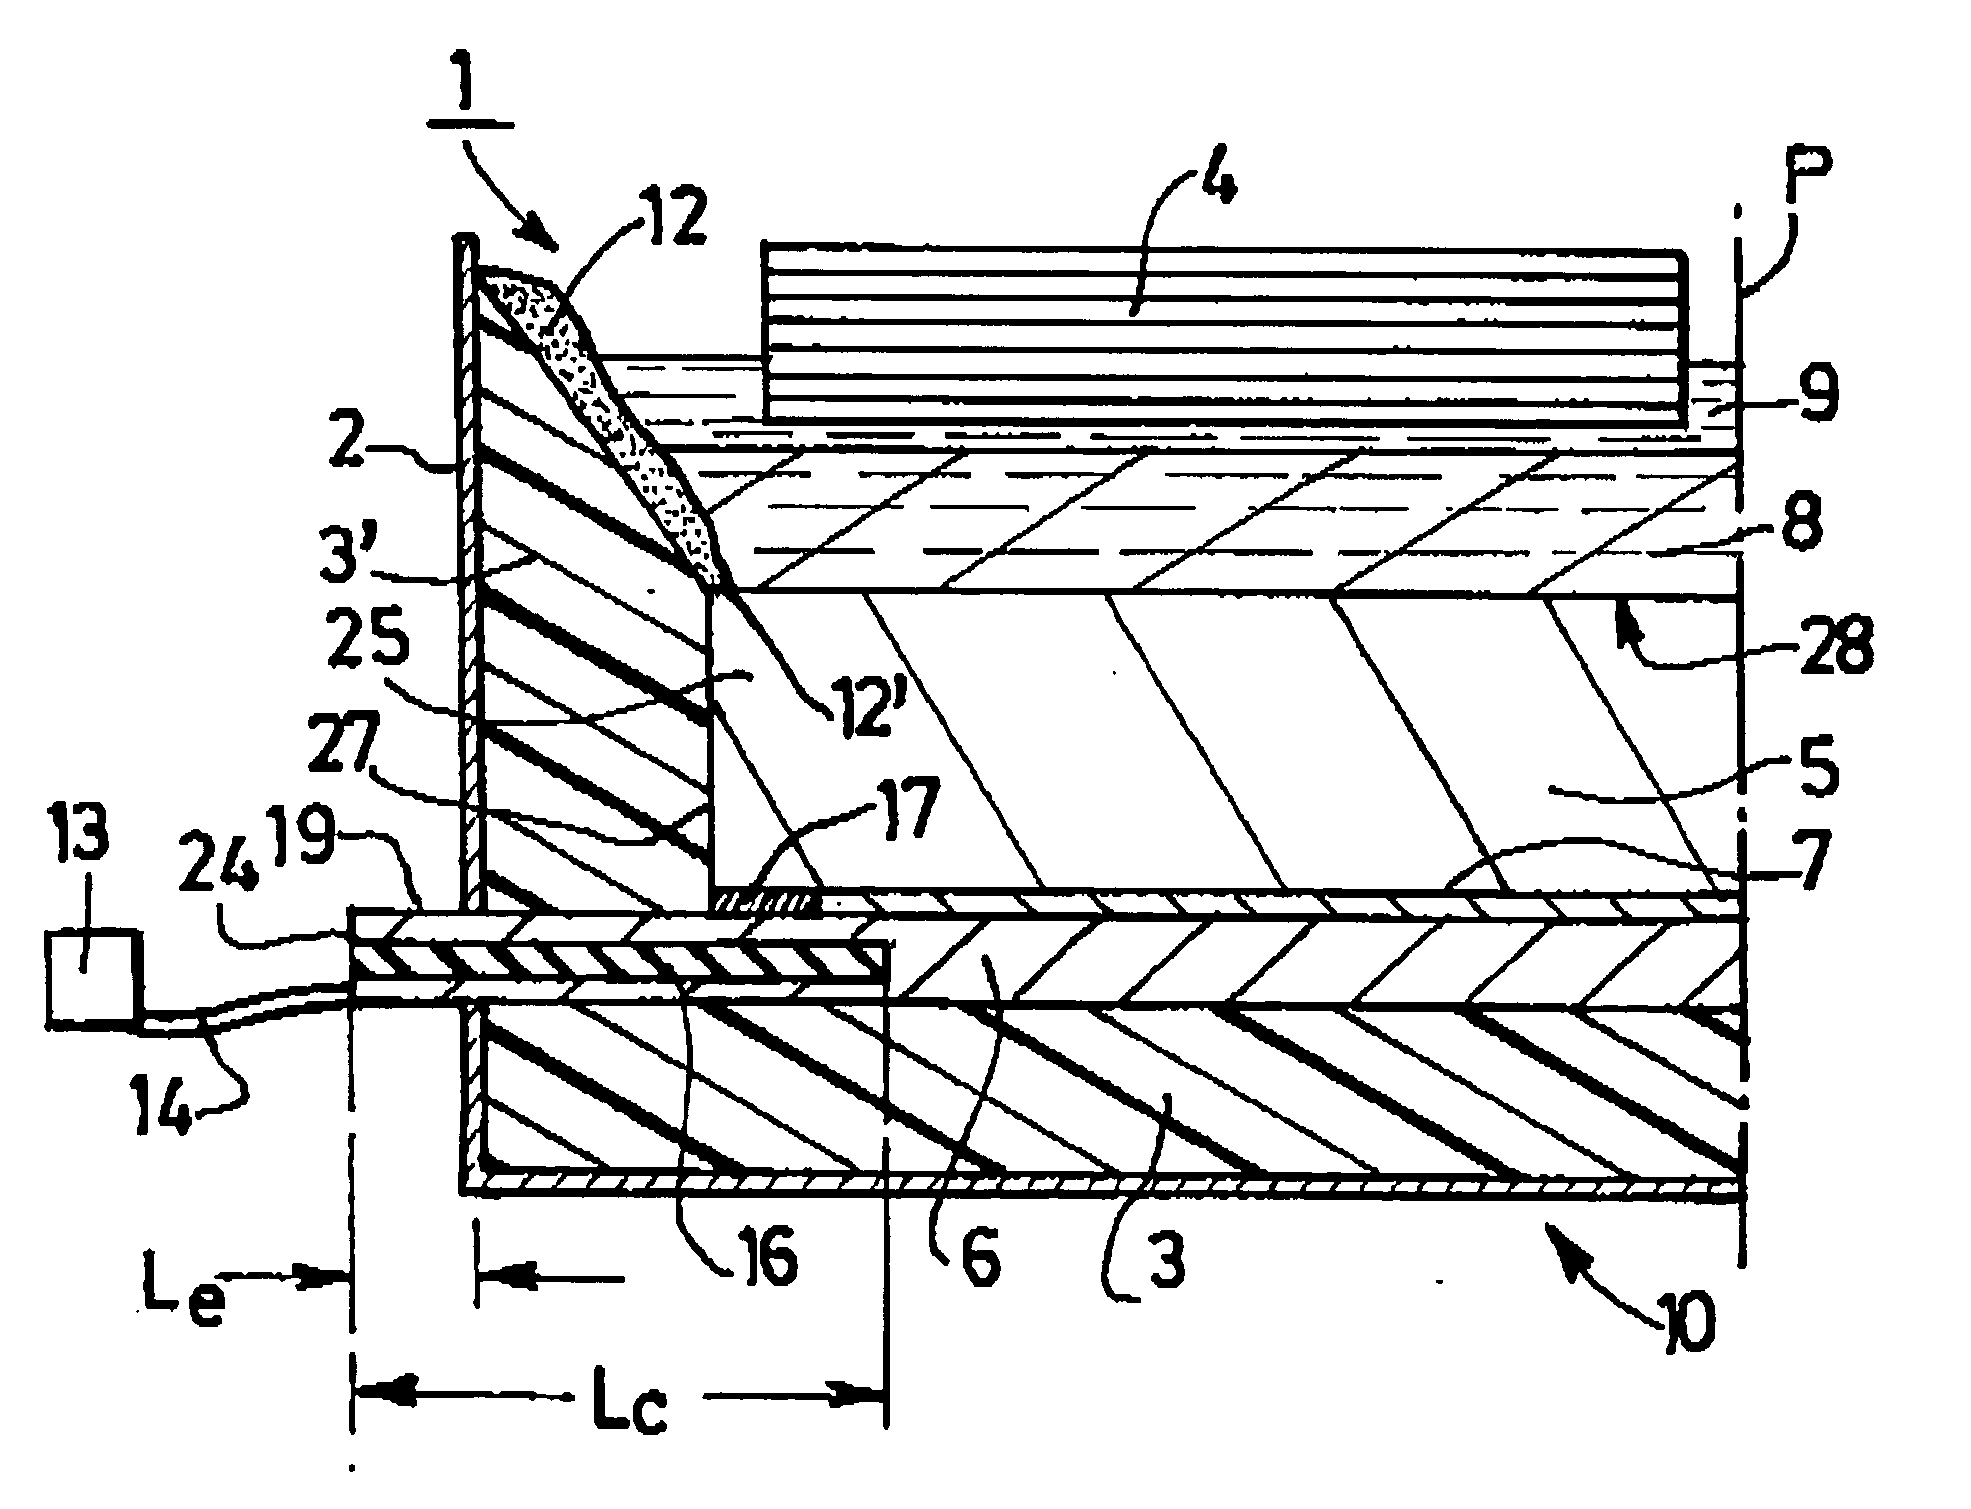 Cathode element for use in an electrolytic cell intended for production of aluminium